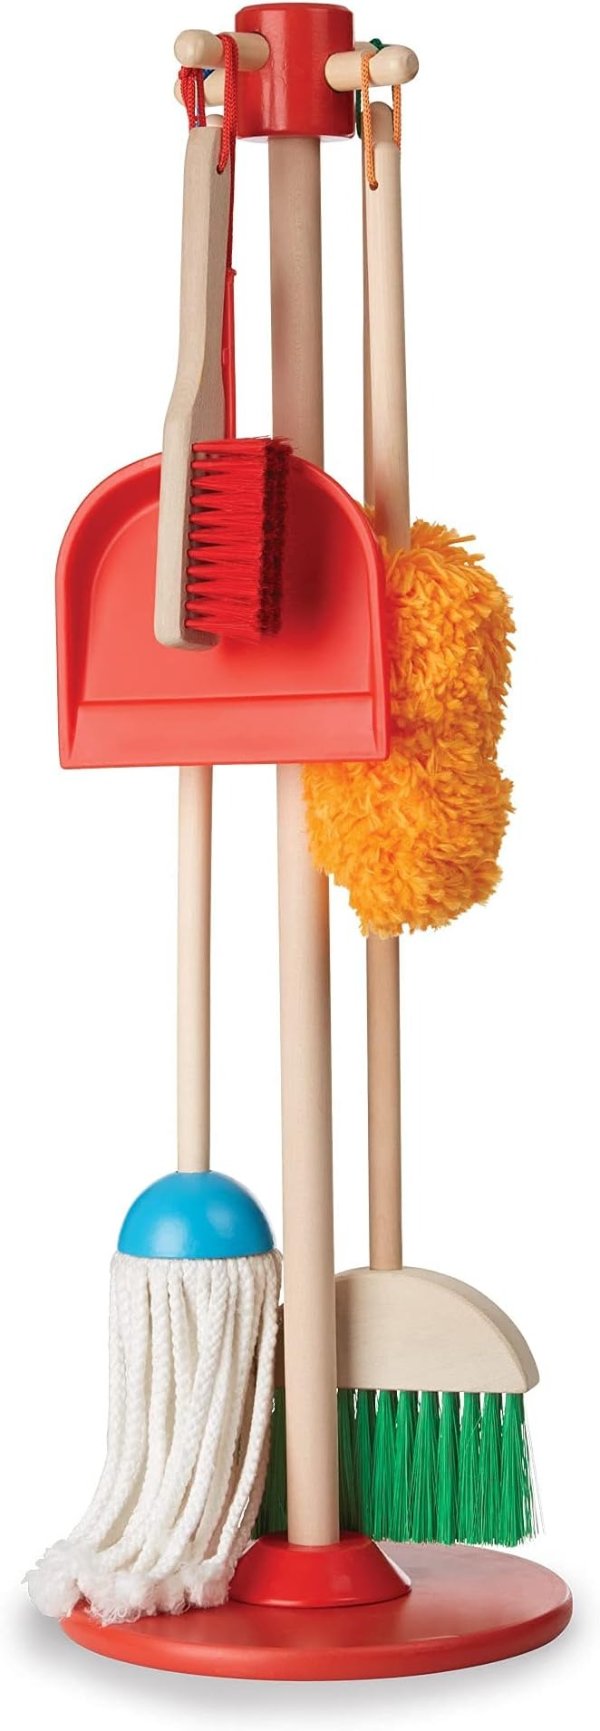 & Doug Dust! Sweep! Mop! (Frustration Free Packaging),Multicolor